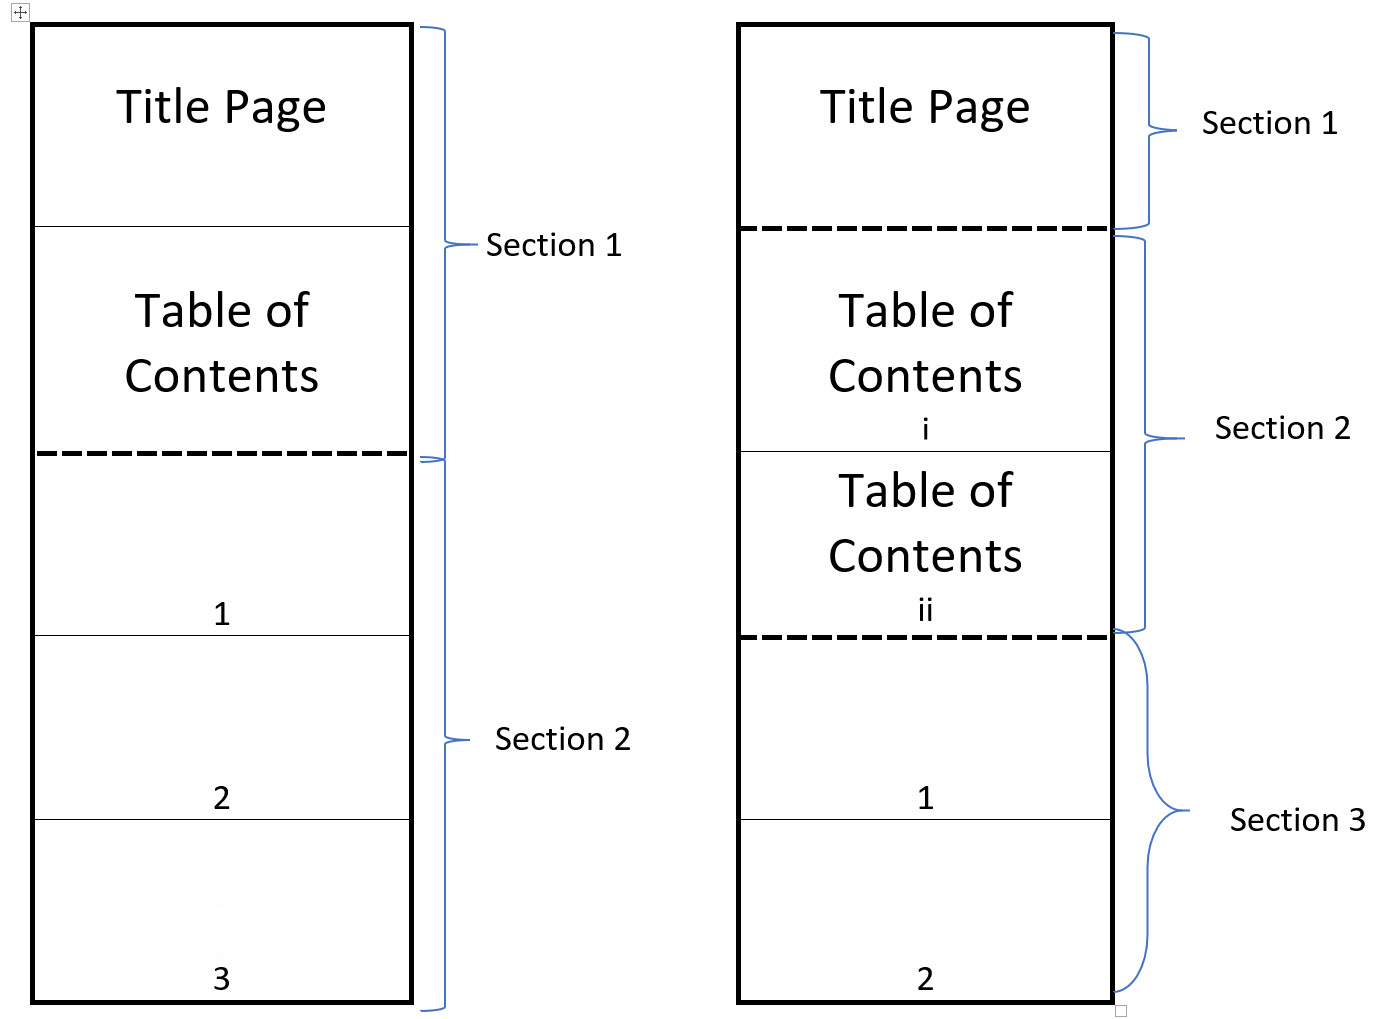 Multiple sections in a document with different page numbers